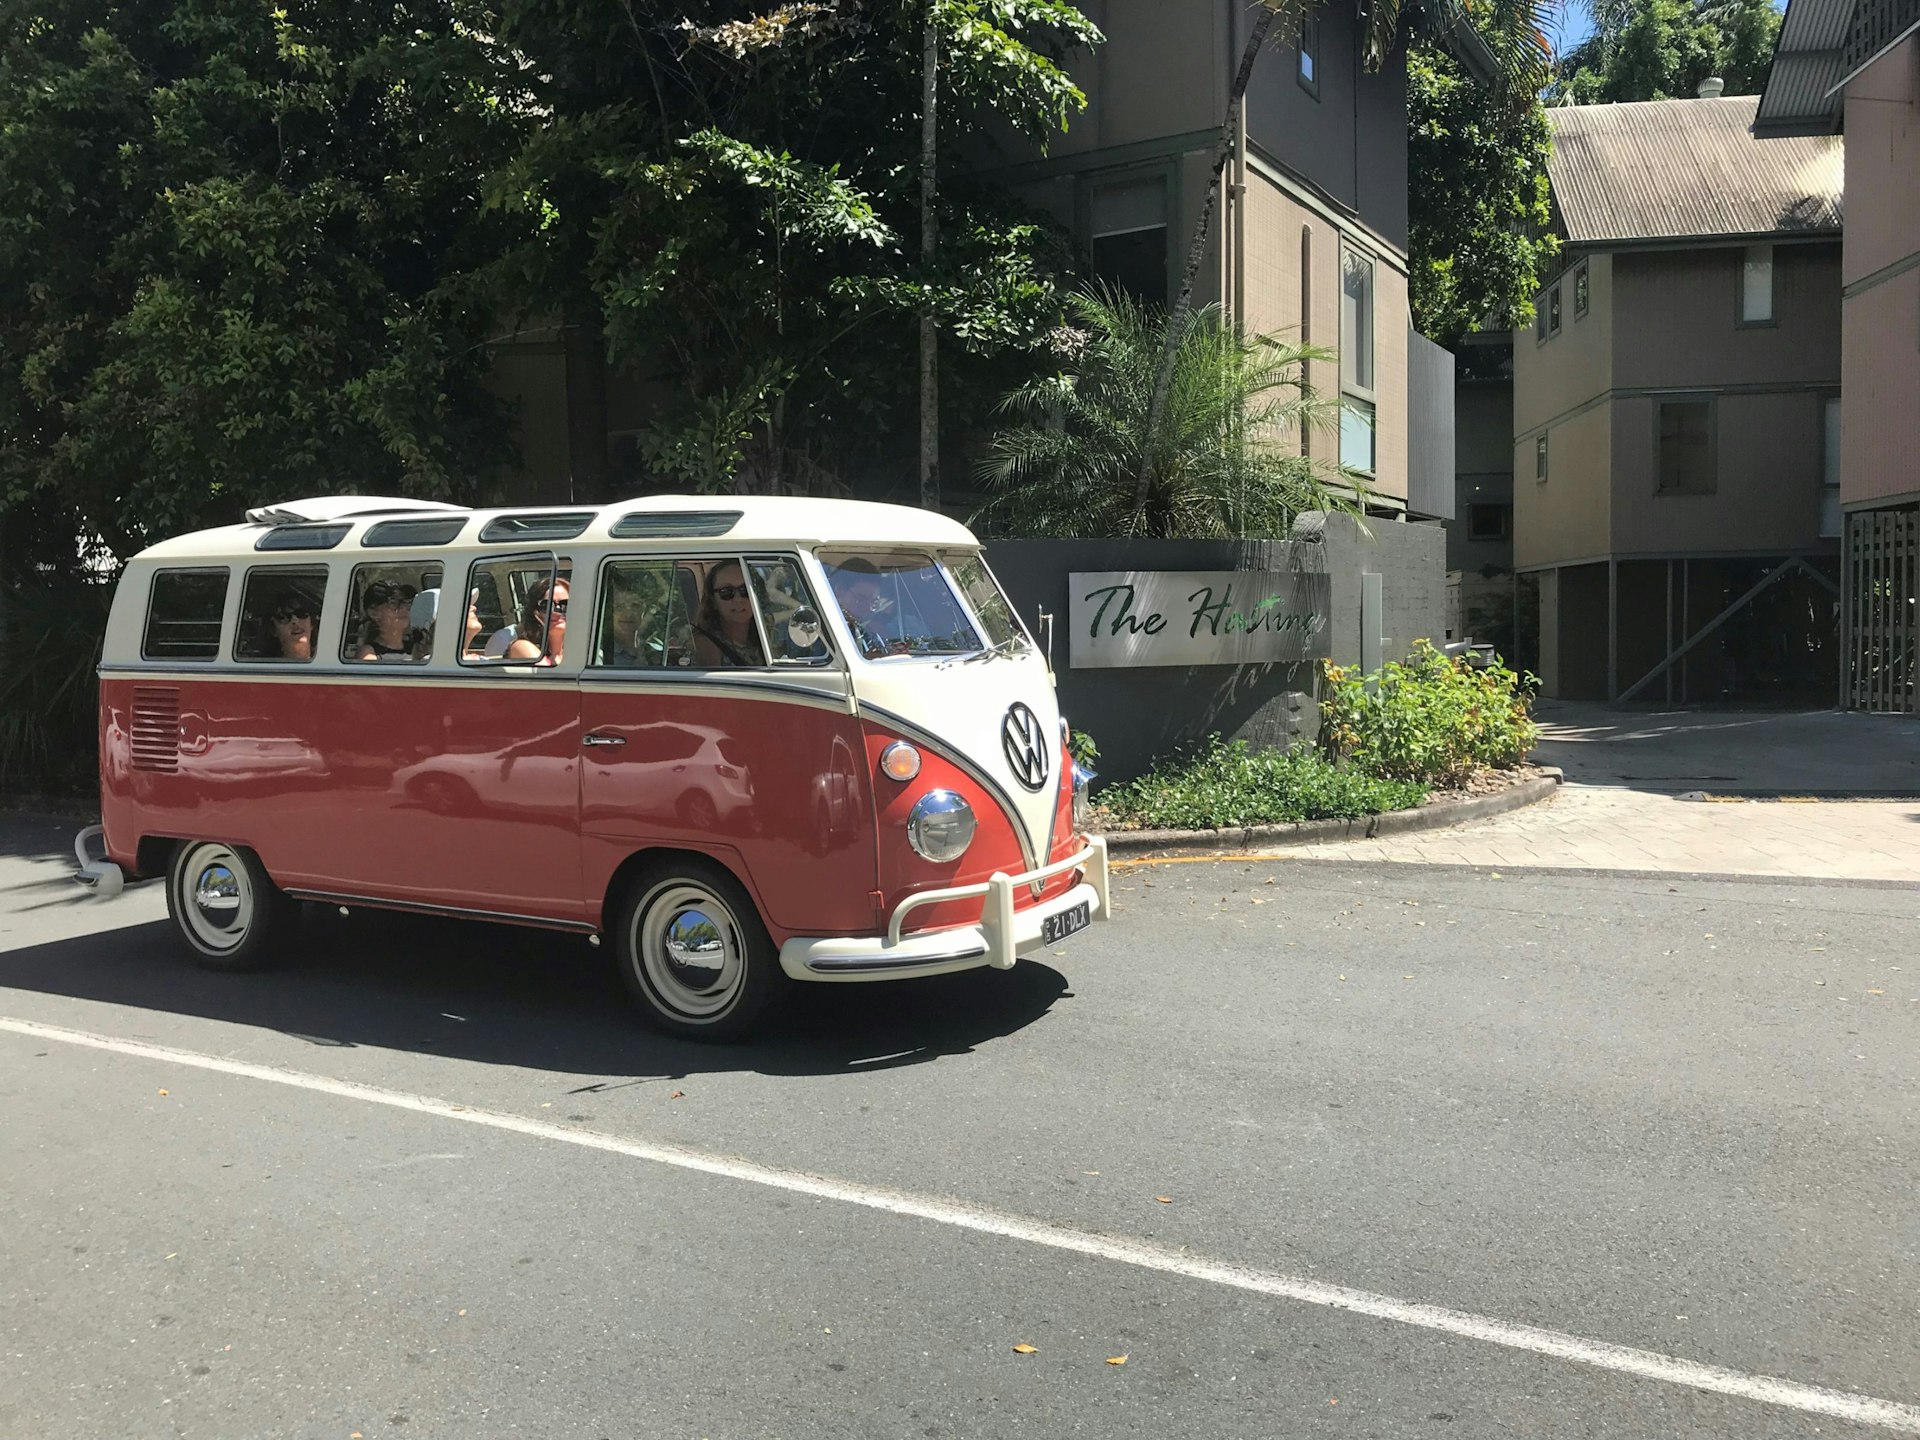 A retro VW Kombi van, with bright red bottom and white top (which converge to a point at the front bumber), drives along a tree-lined street in Noosa; there are numerous individual windows along the van's side and on the edge of the roof, and the middle of the roof is retractable, with the fabric piled near the rear